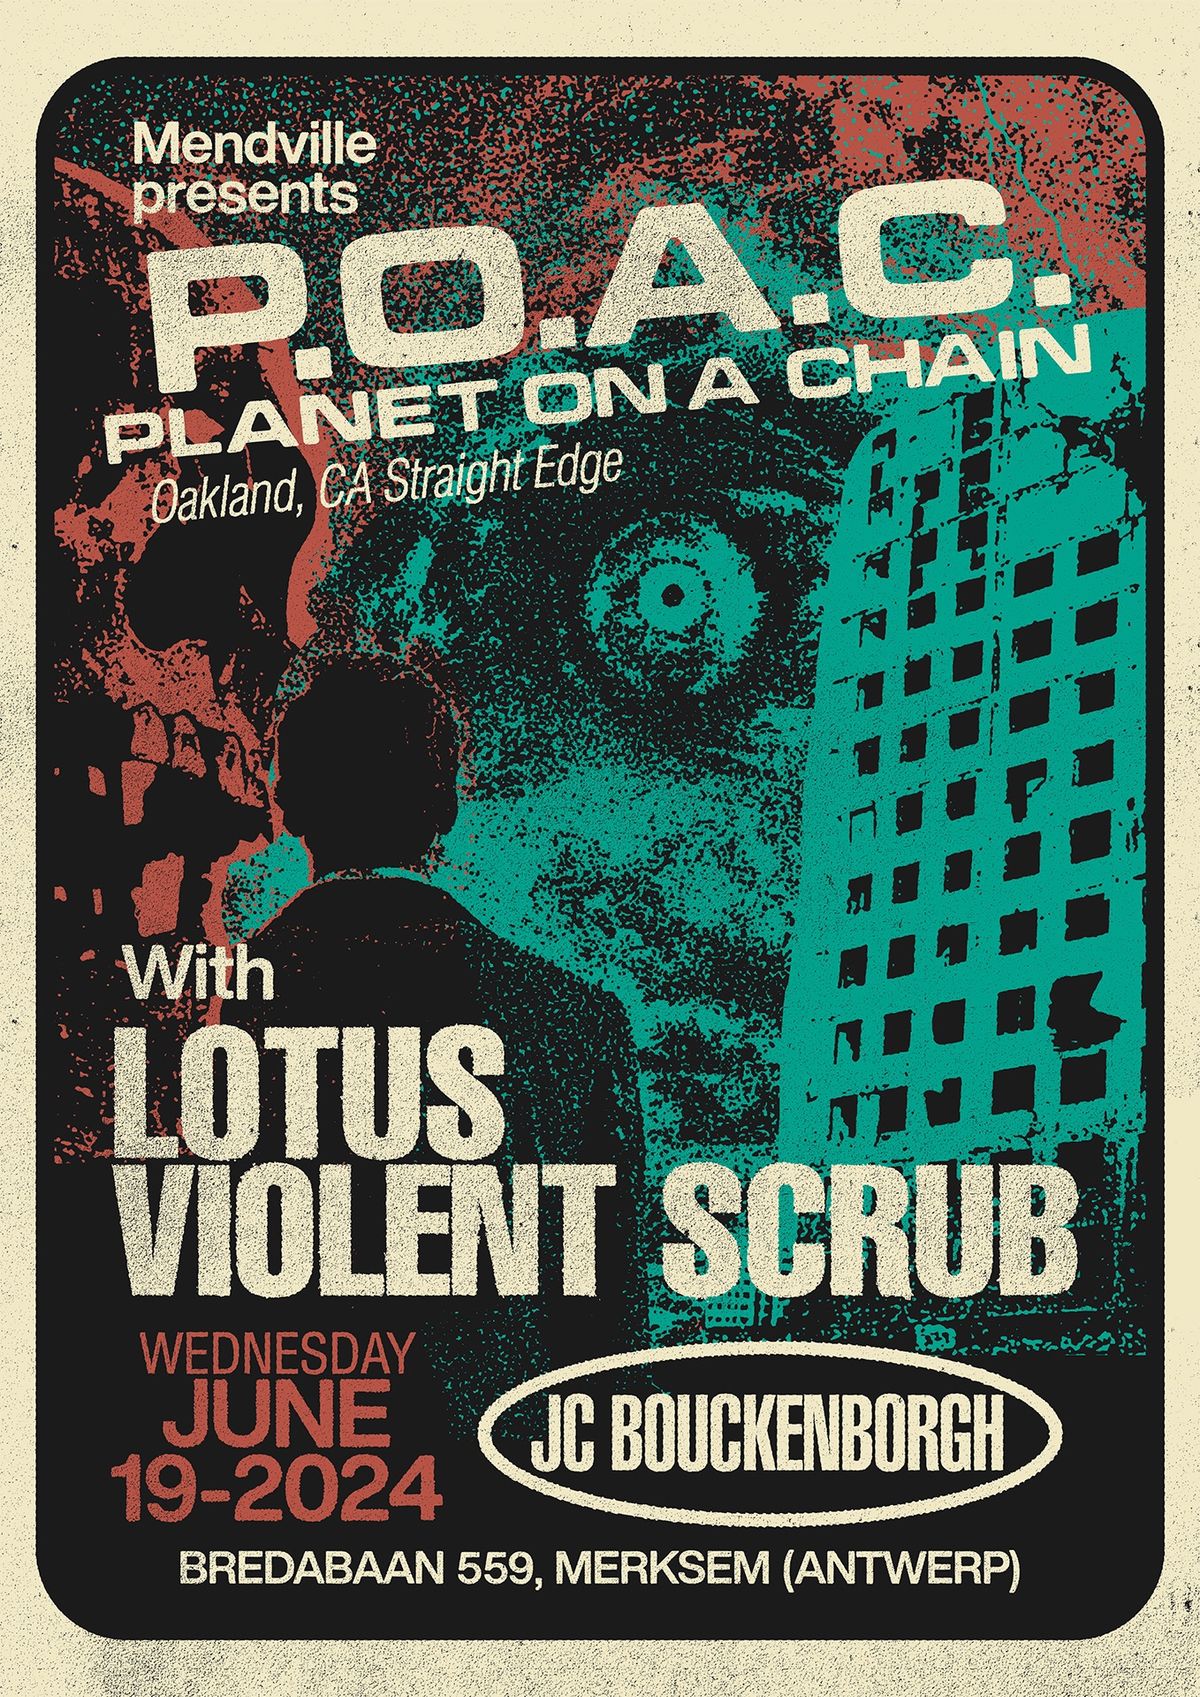 PLANET ON A CHAIN (US) + LOTUS (BE) + VIOLENT SCRUB (BE)